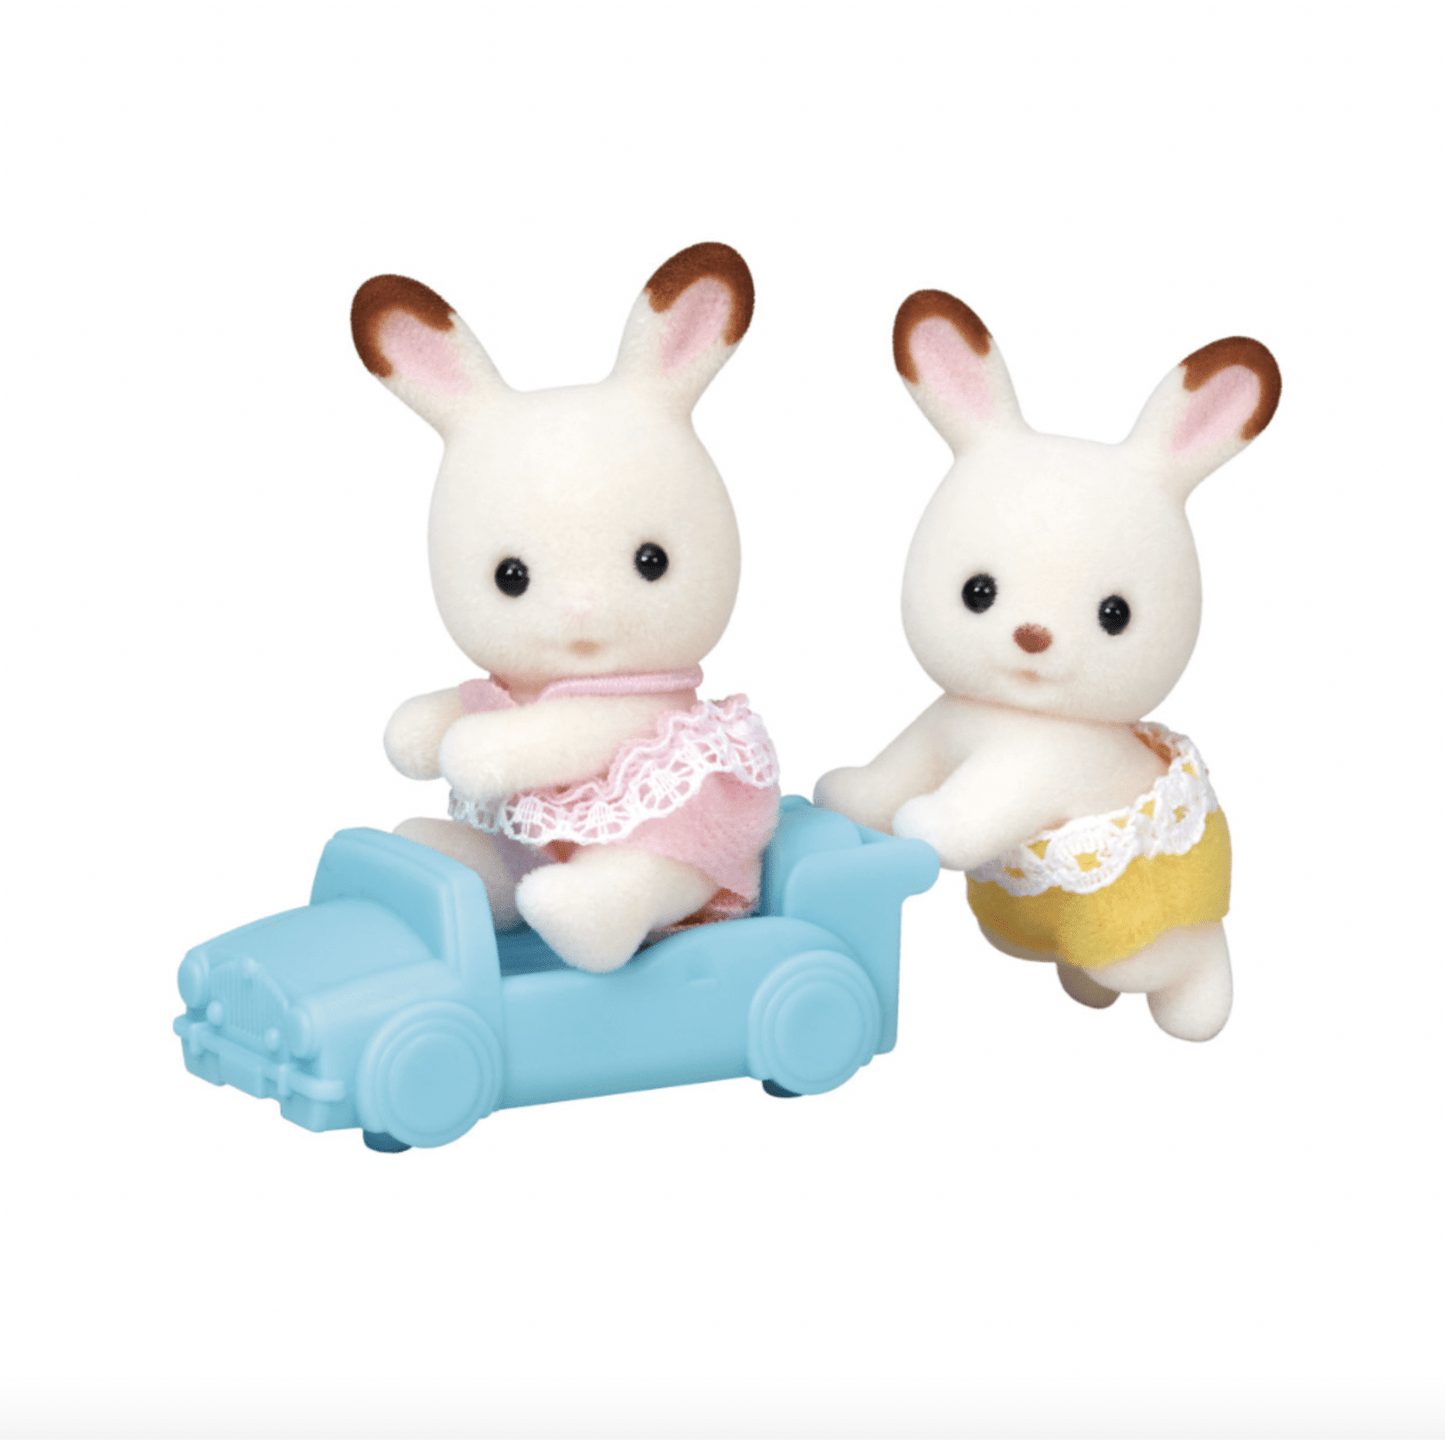 Calico Critters Dolls Calico Critters - Chocolate Rabbit Twins